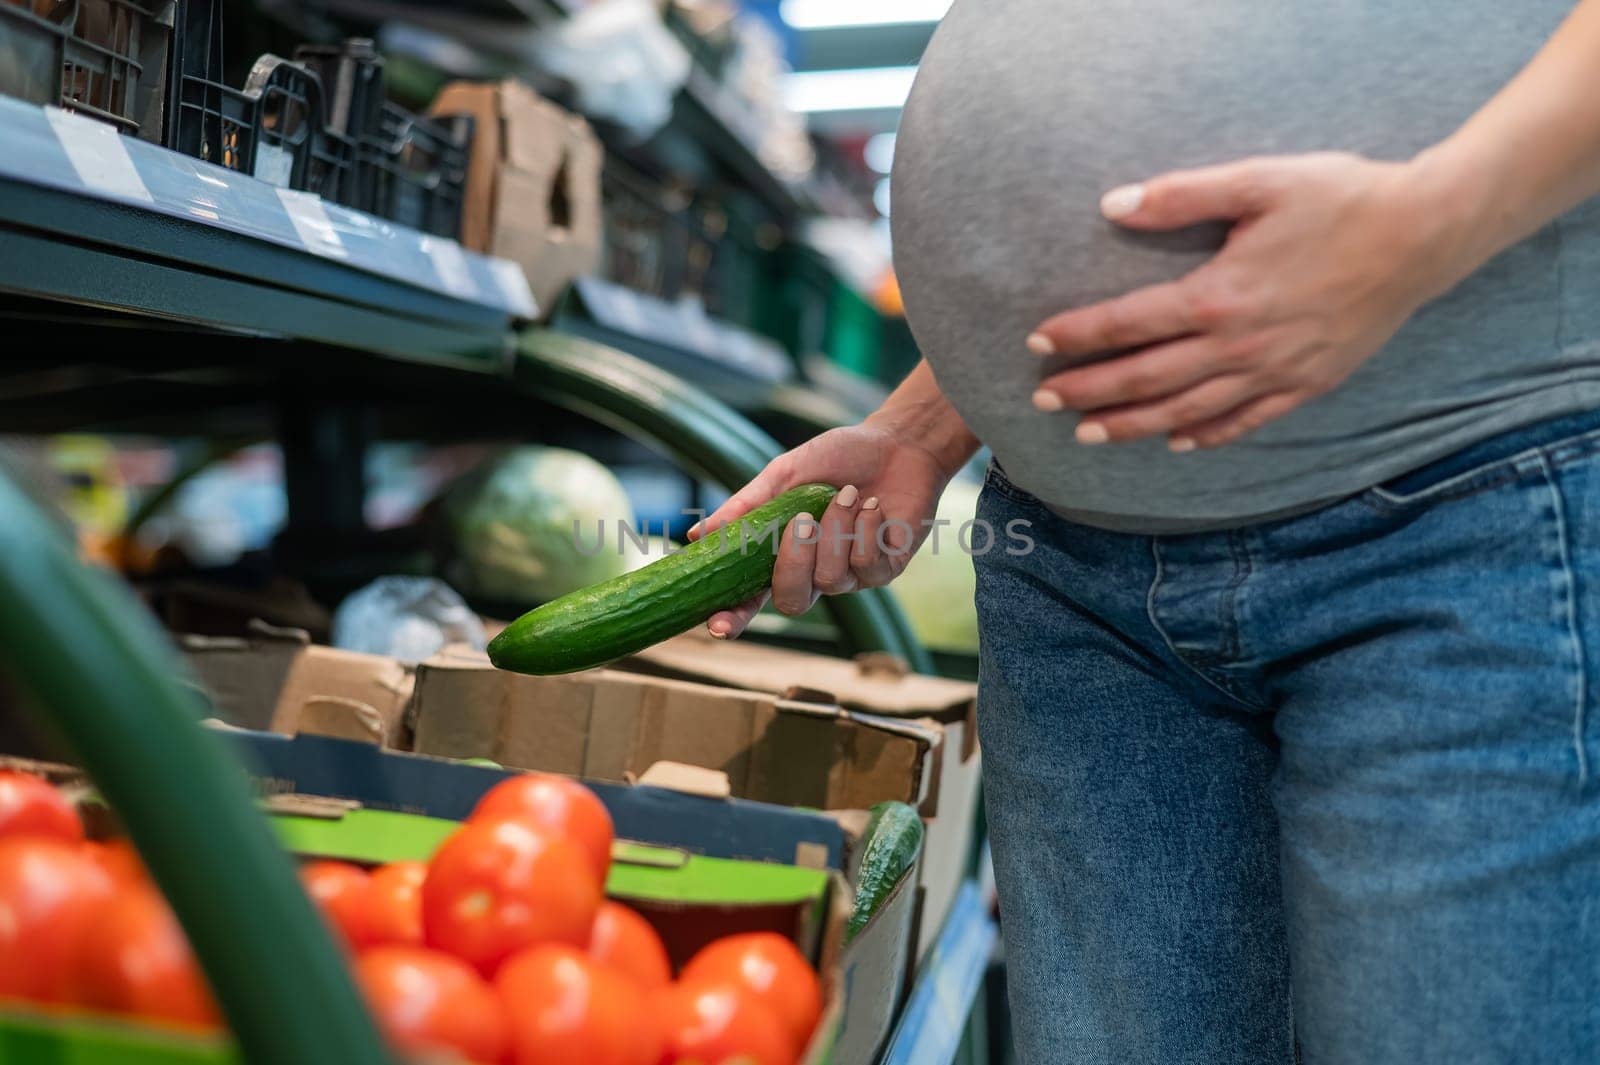 Pregnant woman buys cucumbers in the store. by mrwed54